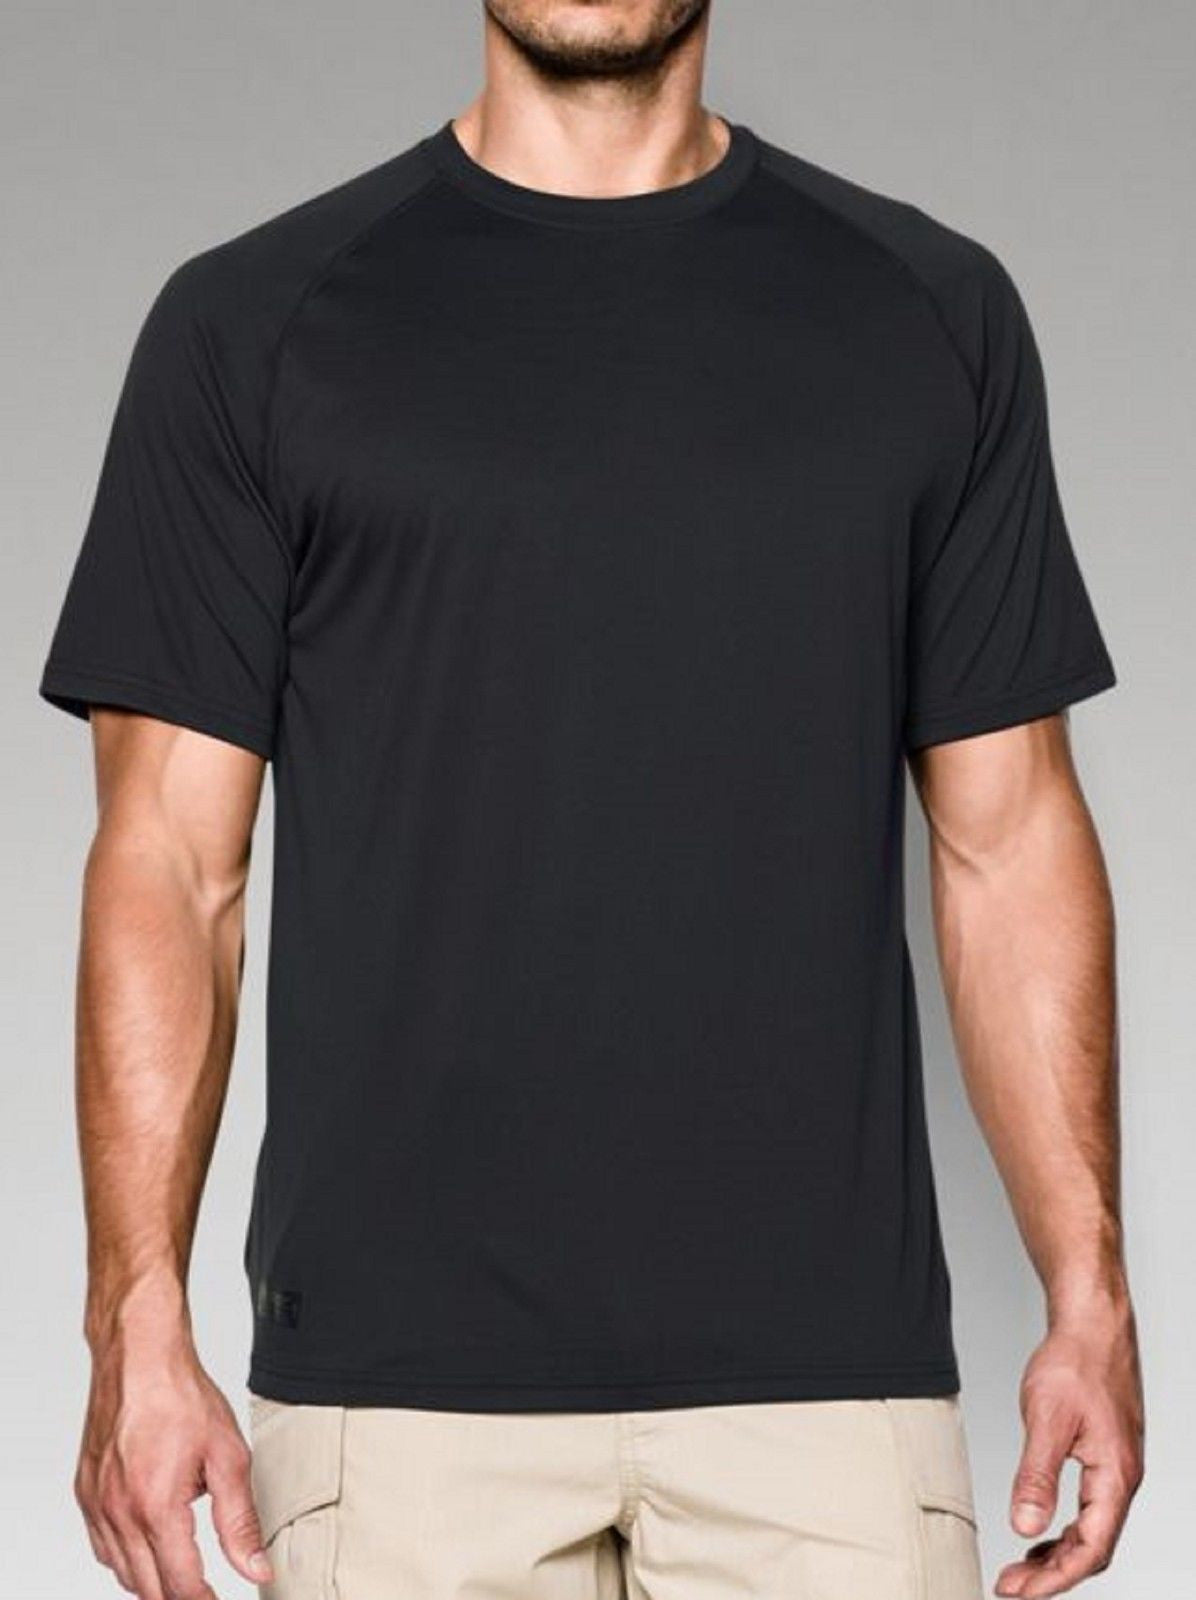 Under Armour, HeatGear Armour Fitted Short Sleeve Training Top Mens, Short Sleeve Performance T-Shirts